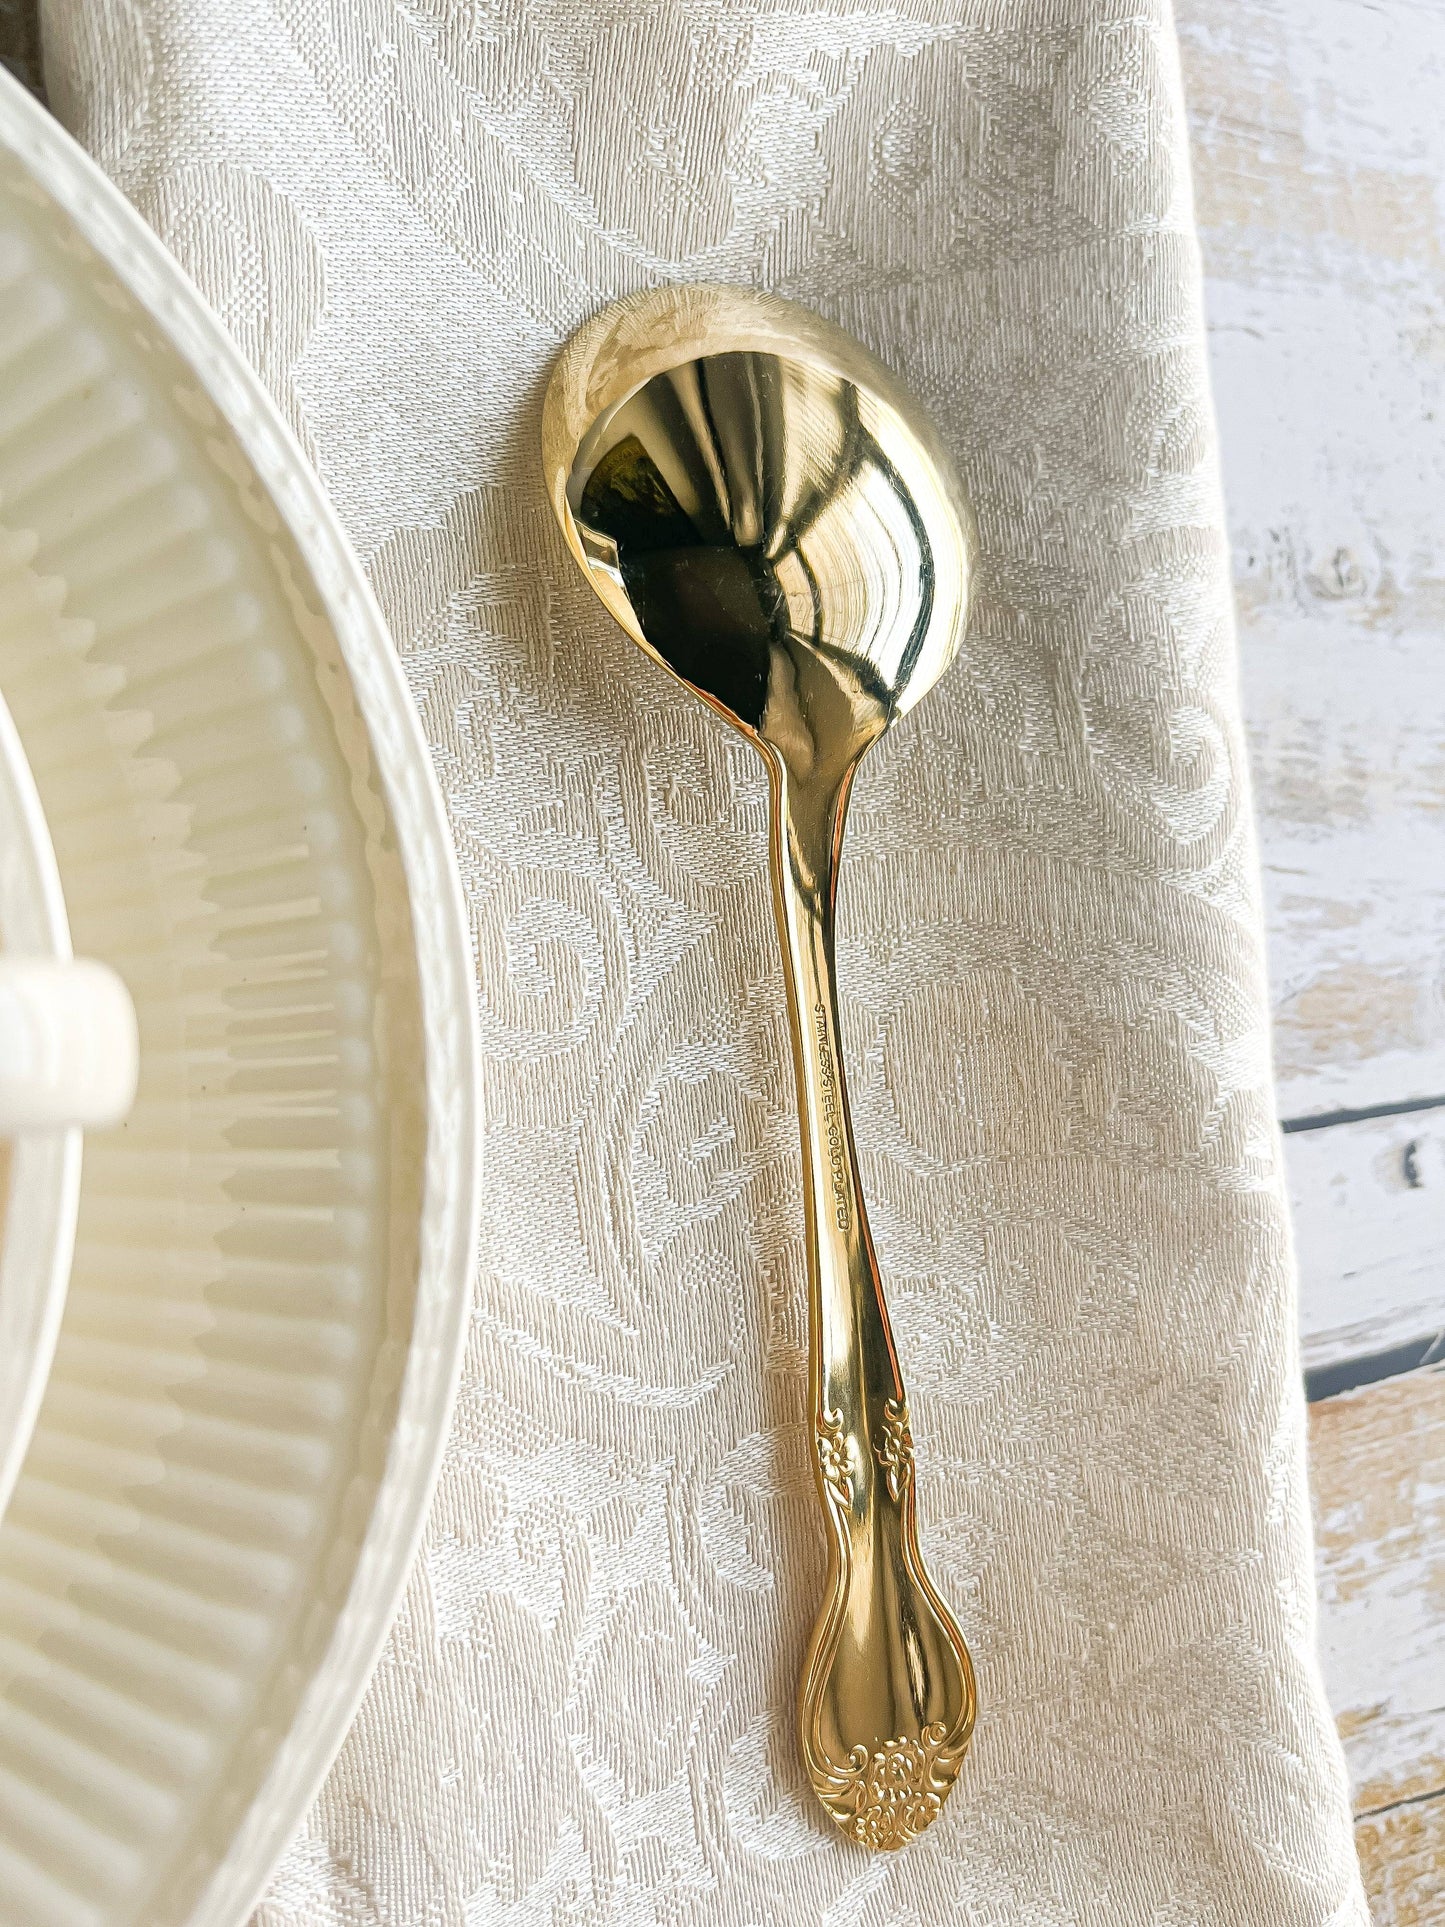 Oneida Gold-Plated Set of 6 Soup Spoons - 'Golden Malmaison' Pattern - SOSC Home